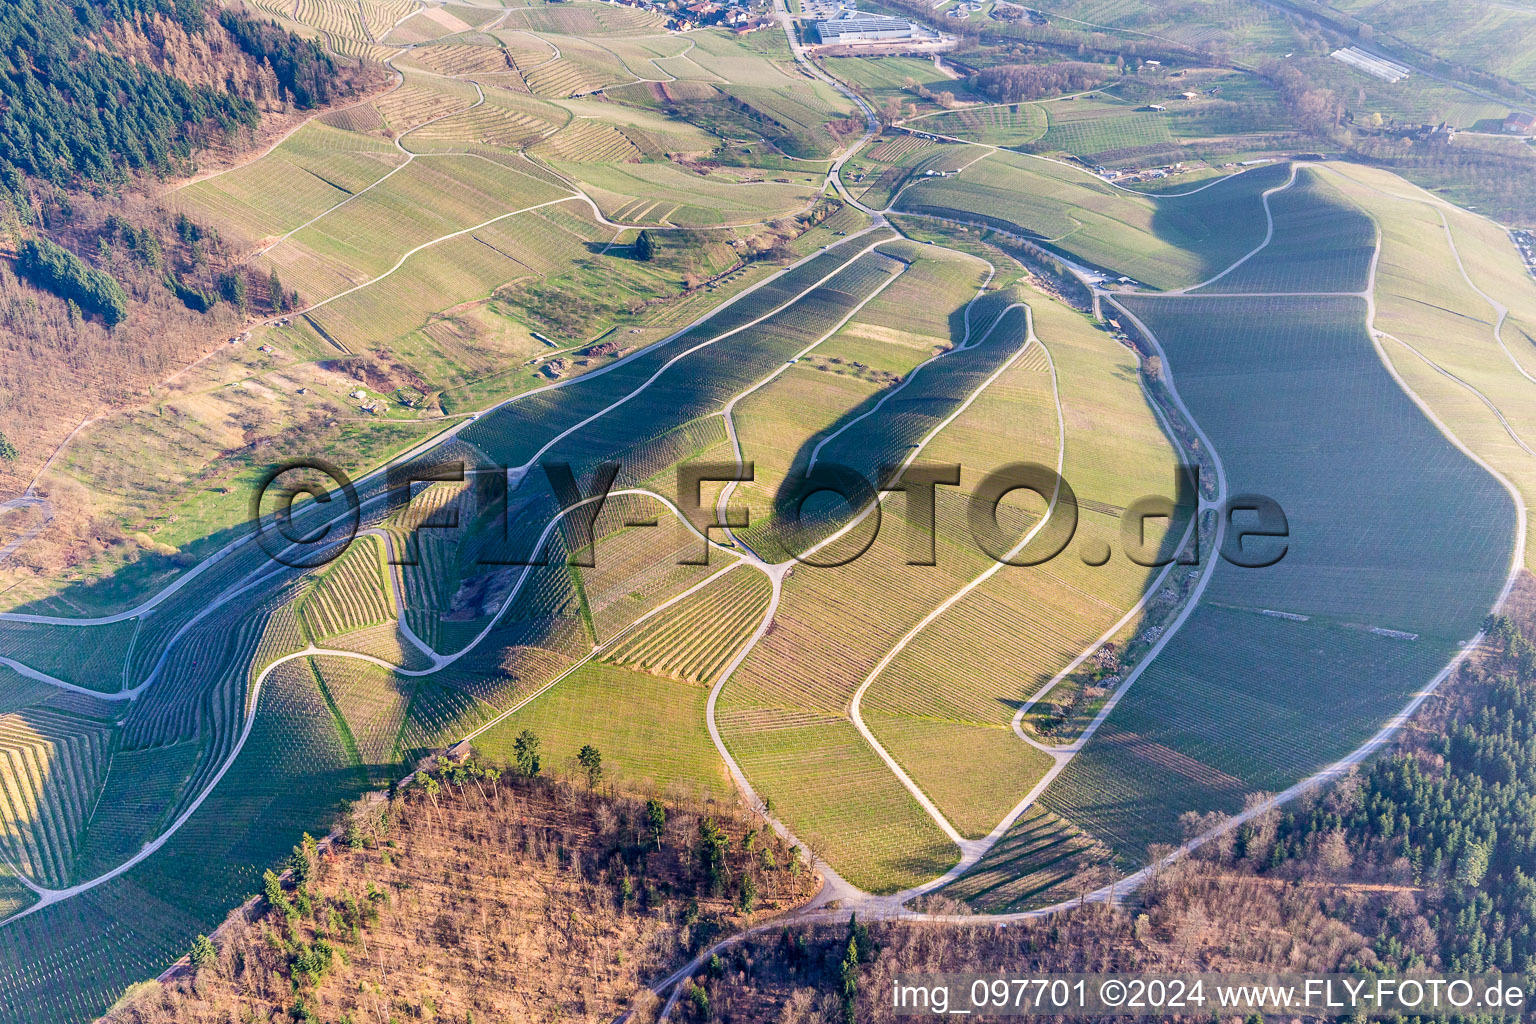 Fields of wine cultivation landscape in Kappelrodeck in the state Baden-Wurttemberg, Germany